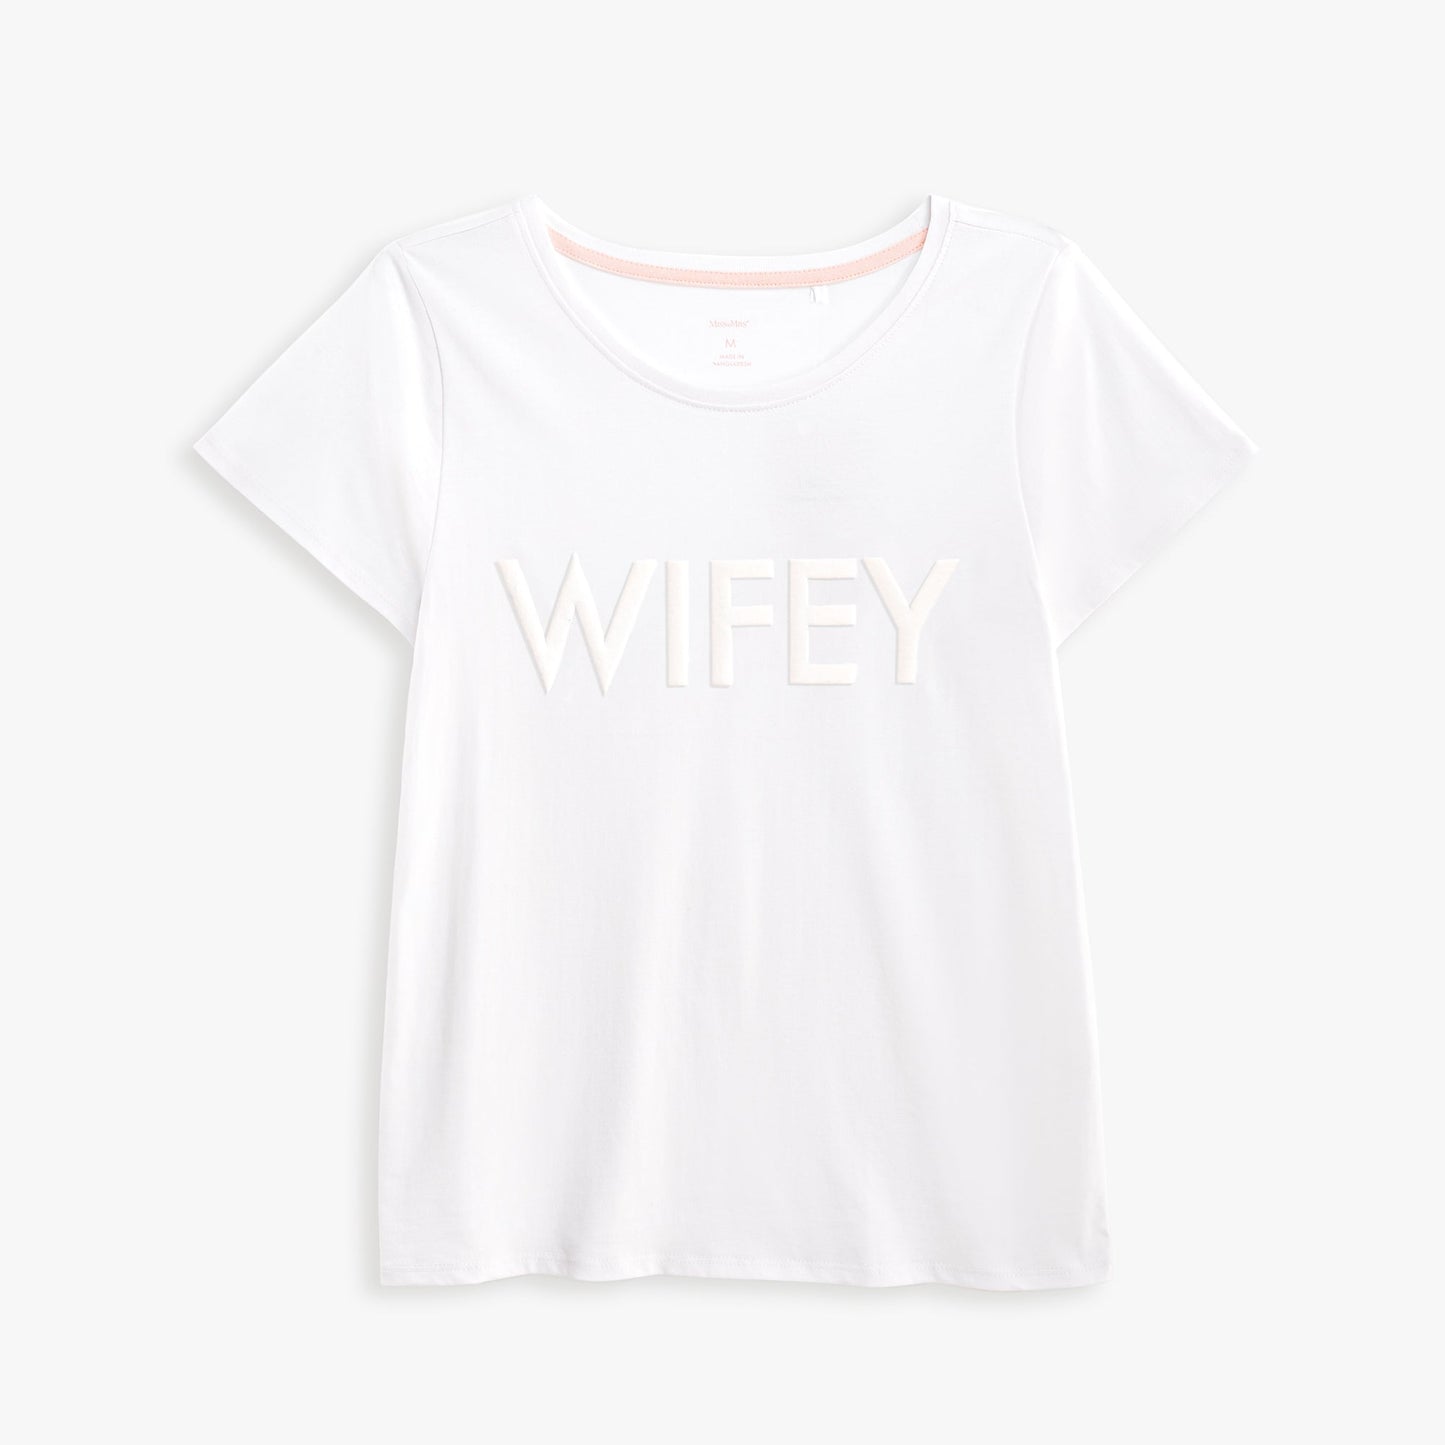 Hubby and Wifey Puff Print T-shirt Set